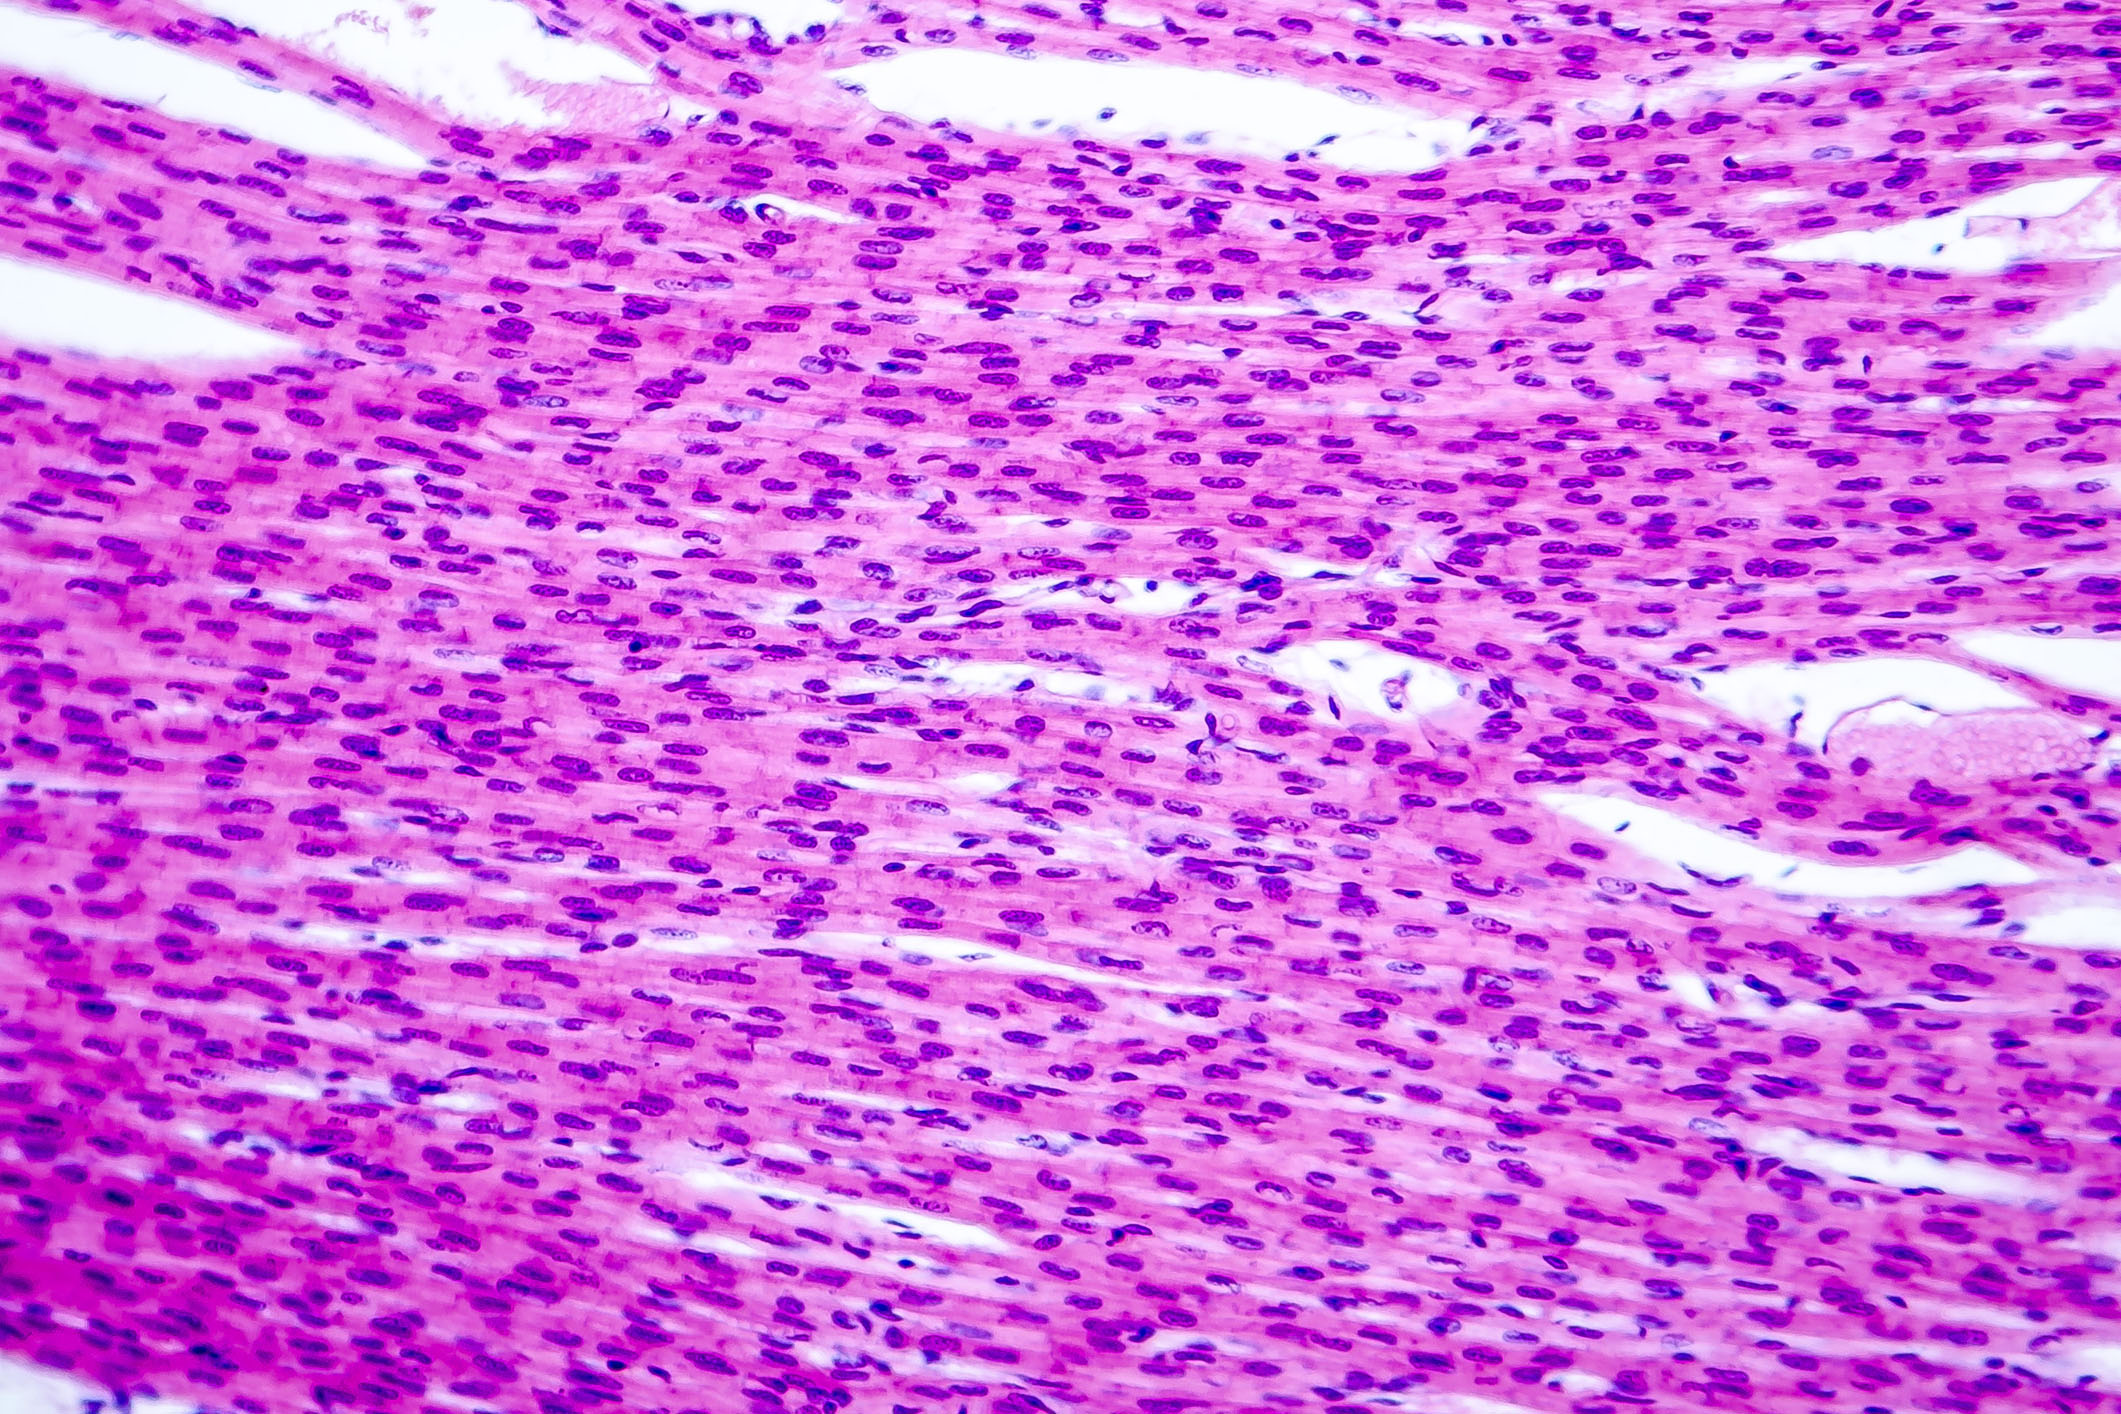 Histological image of heart muscle